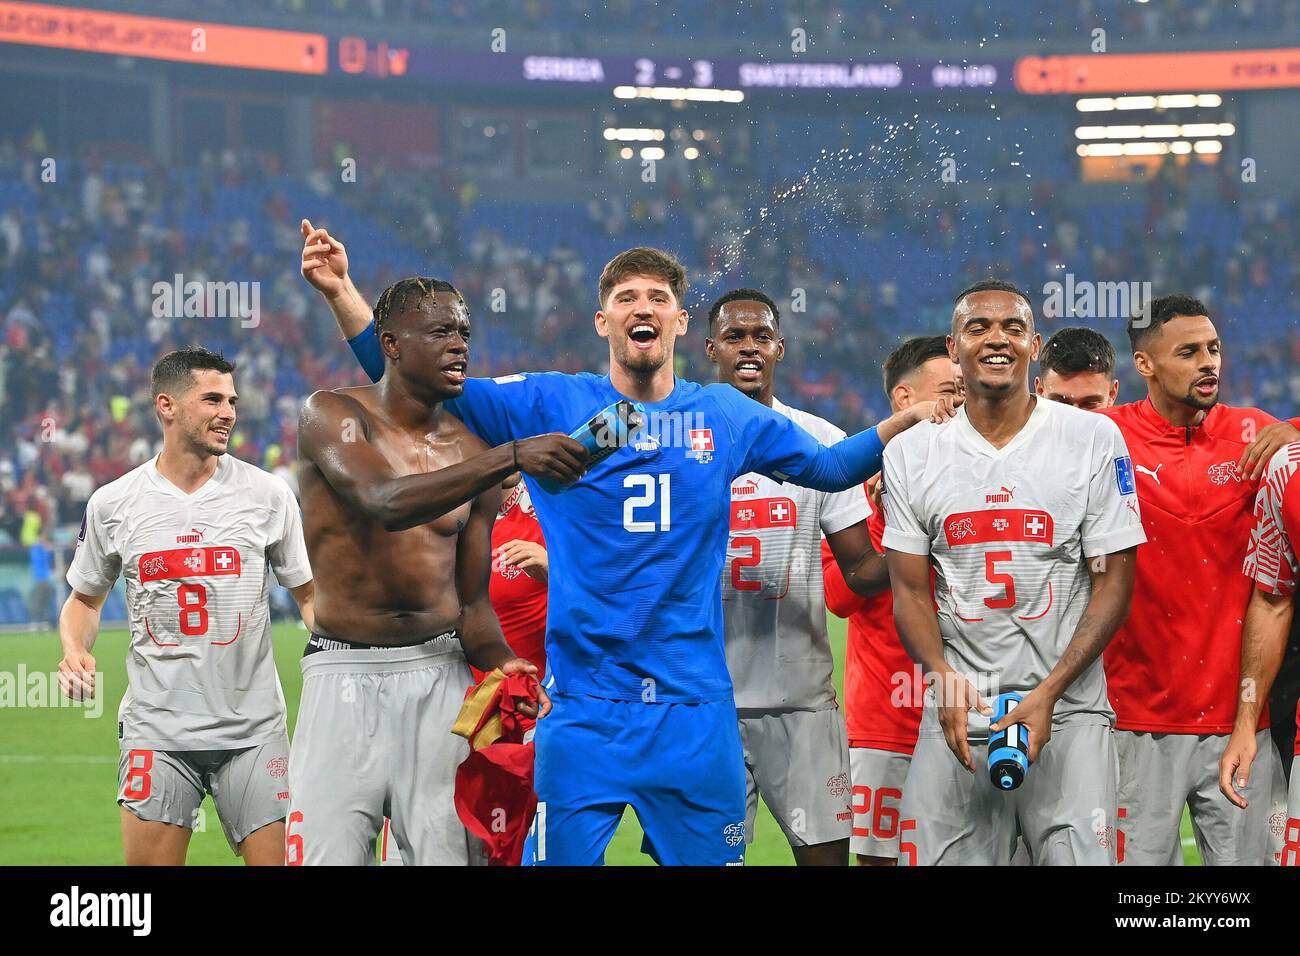 Doha, Katar. 02nd Dec, 2022. From left: Remo FREULER (SUI), ZAKARIA Denis (SUI), goalwart KOBEL Gregor (SUI), FERNANDES Edimilson (SUI), Manuel AKANJI (SUI), collective final jubilation after entering the round of 16, jubilation, joy, enthusiasm, Action. Serbia (SRB) - Switzerland (SUI) 2-3 Group stage Group G, Game 47 on 02.12.2022, Stadium 974, Football World Cup 2022 in Qatar from 20.11. - 18.12.2022 ? Credit: dpa/Alamy Live News Stock Photo